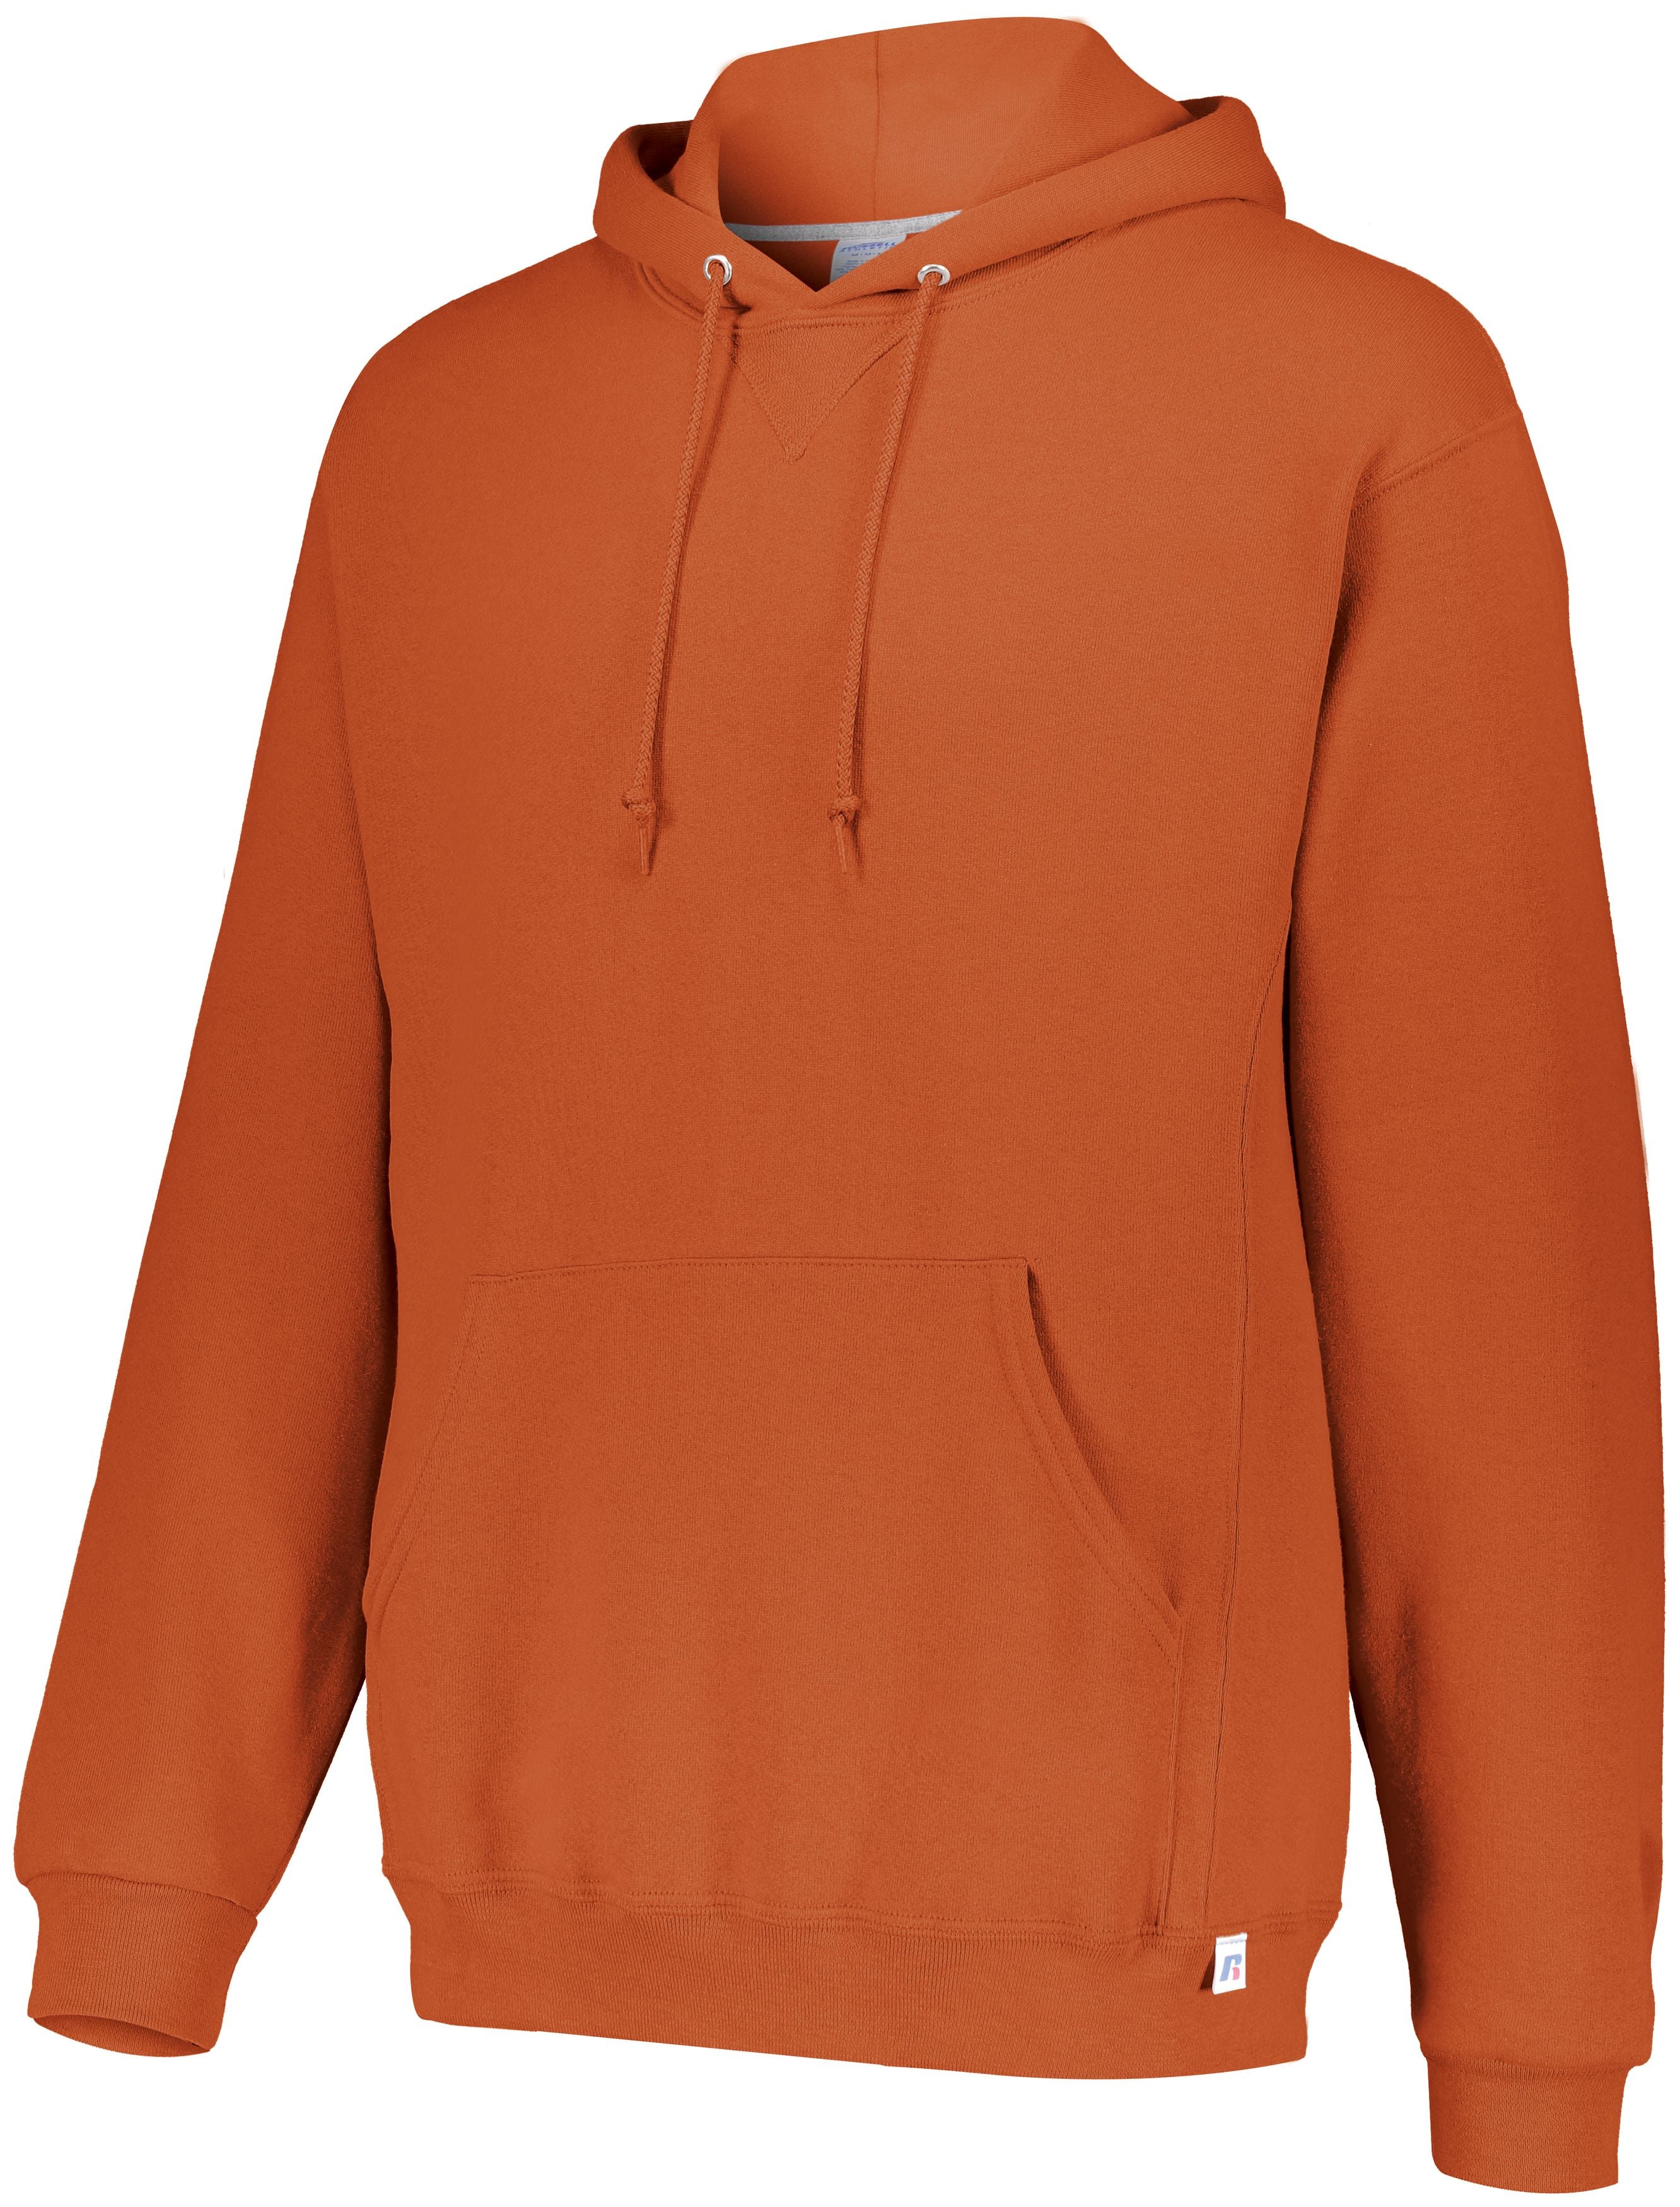 Russell Athletic Dri-Power Fleece Hoodie in Burnt Orange  -Part of the Adult, Russell-Athletic-Products, Shirts product lines at KanaleyCreations.com